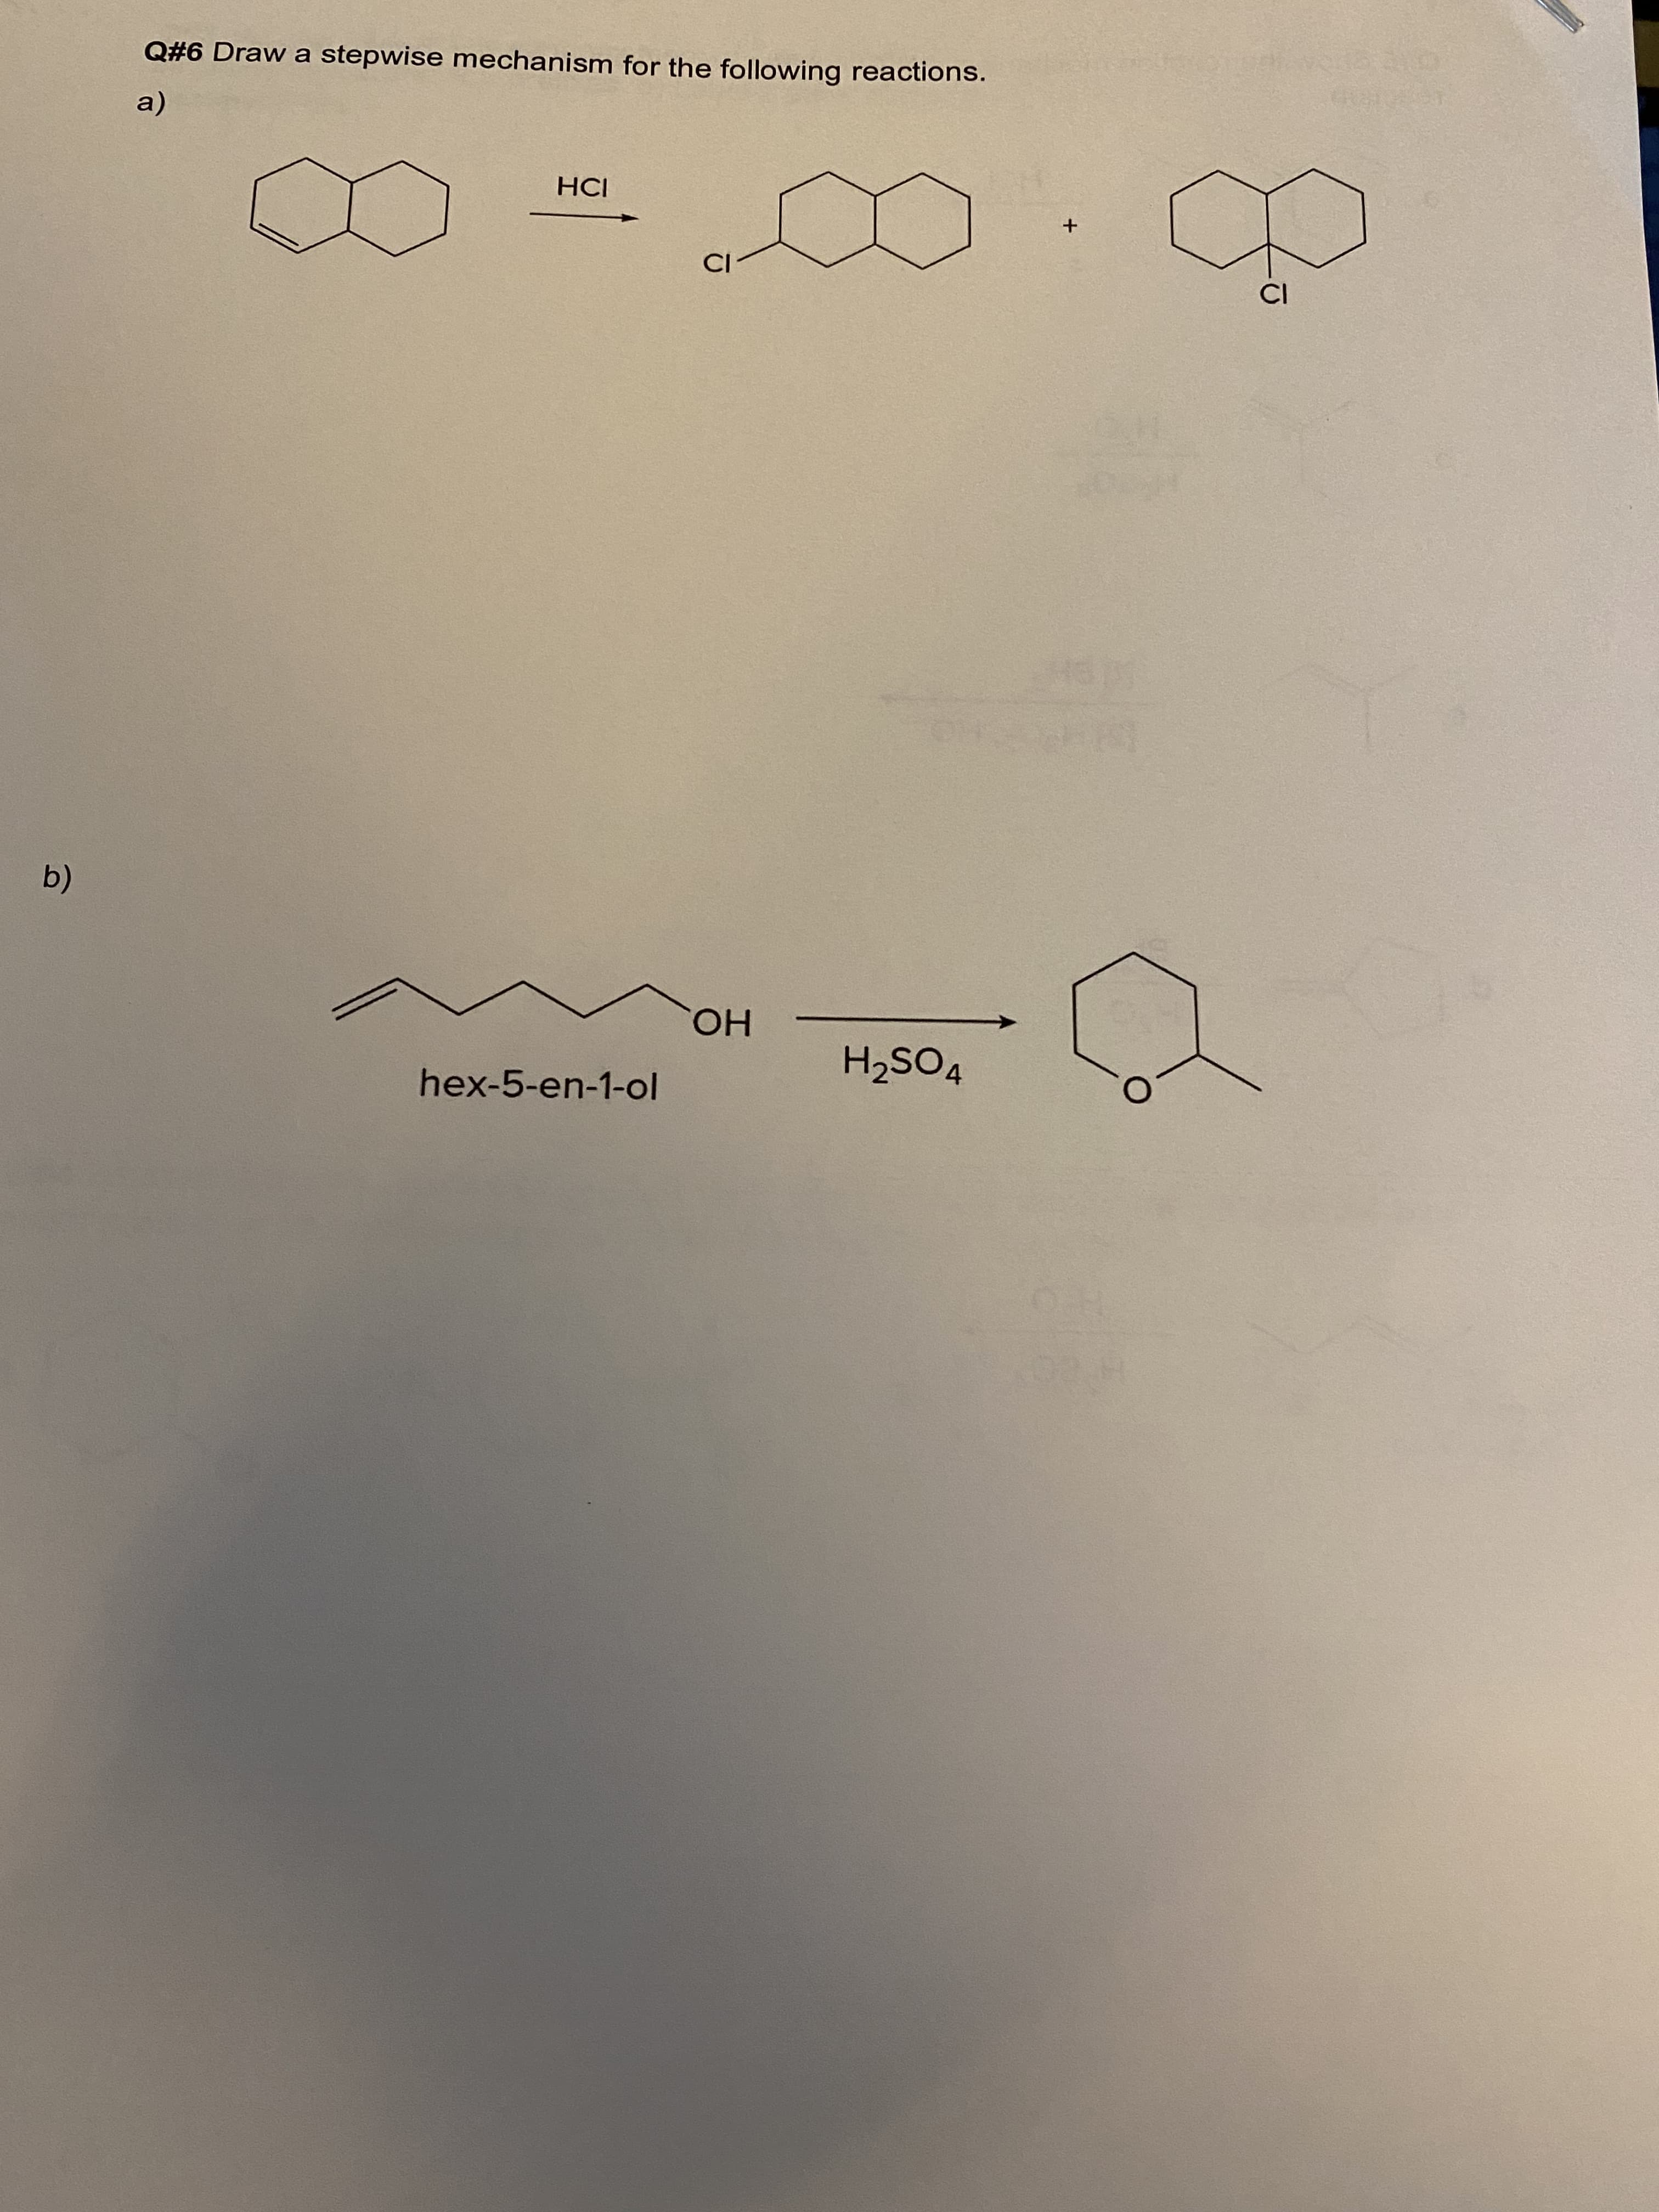 Q#6 Draw a stepwise mechanism for the following reactions.
a)
(b)
HO.
H2SO4
hex-5-en-1-ol
